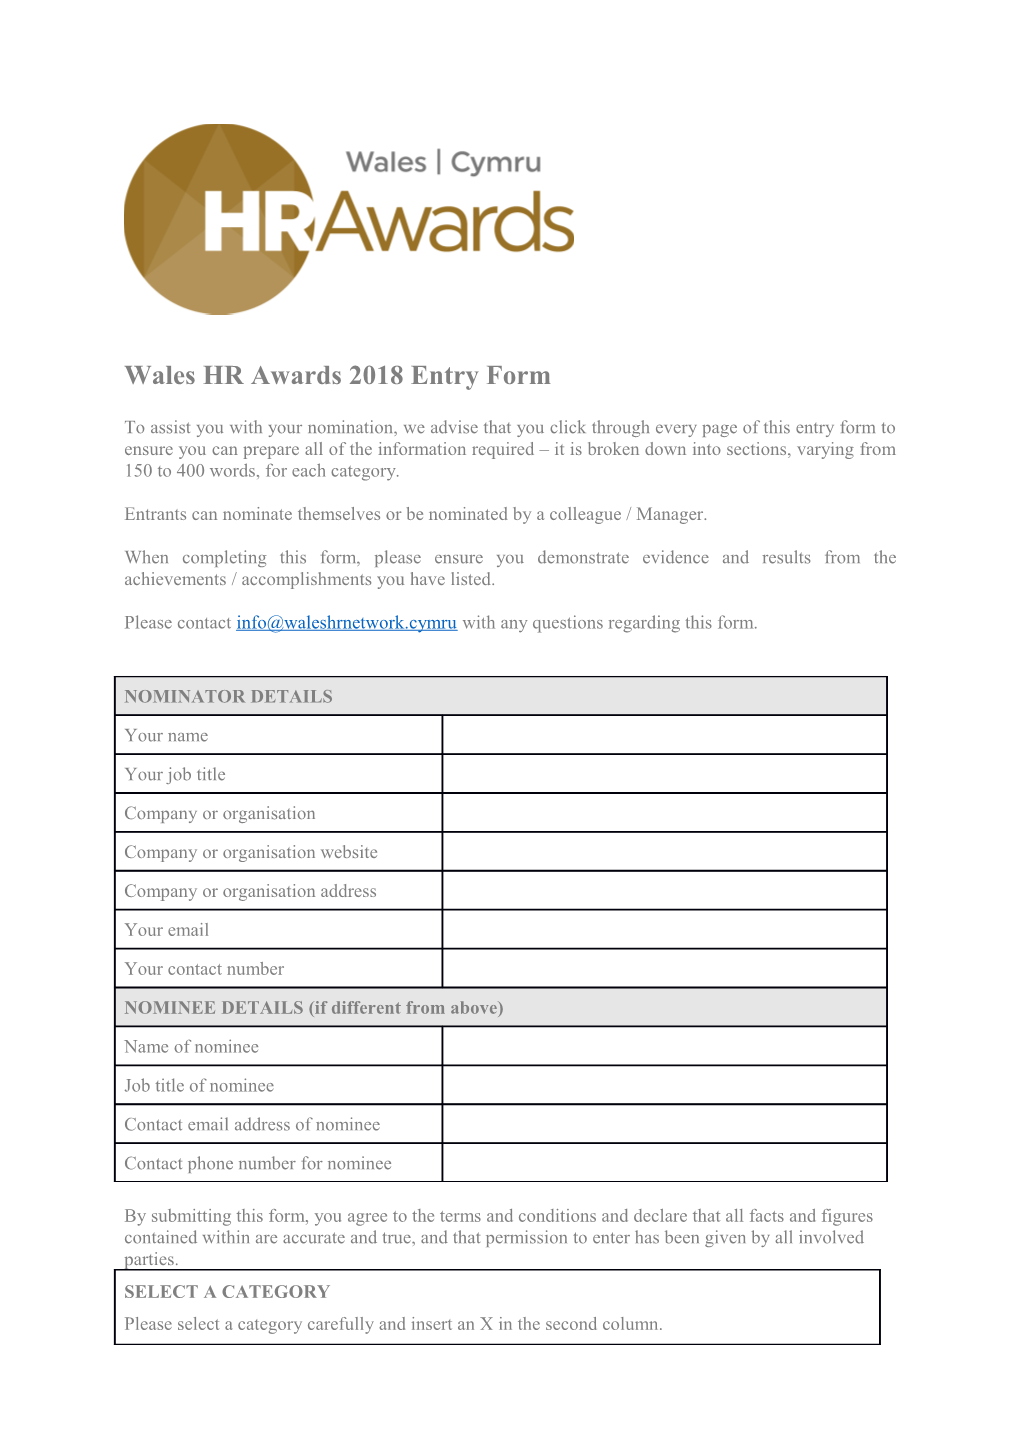 Wales HR Awards 2018 Entry Form